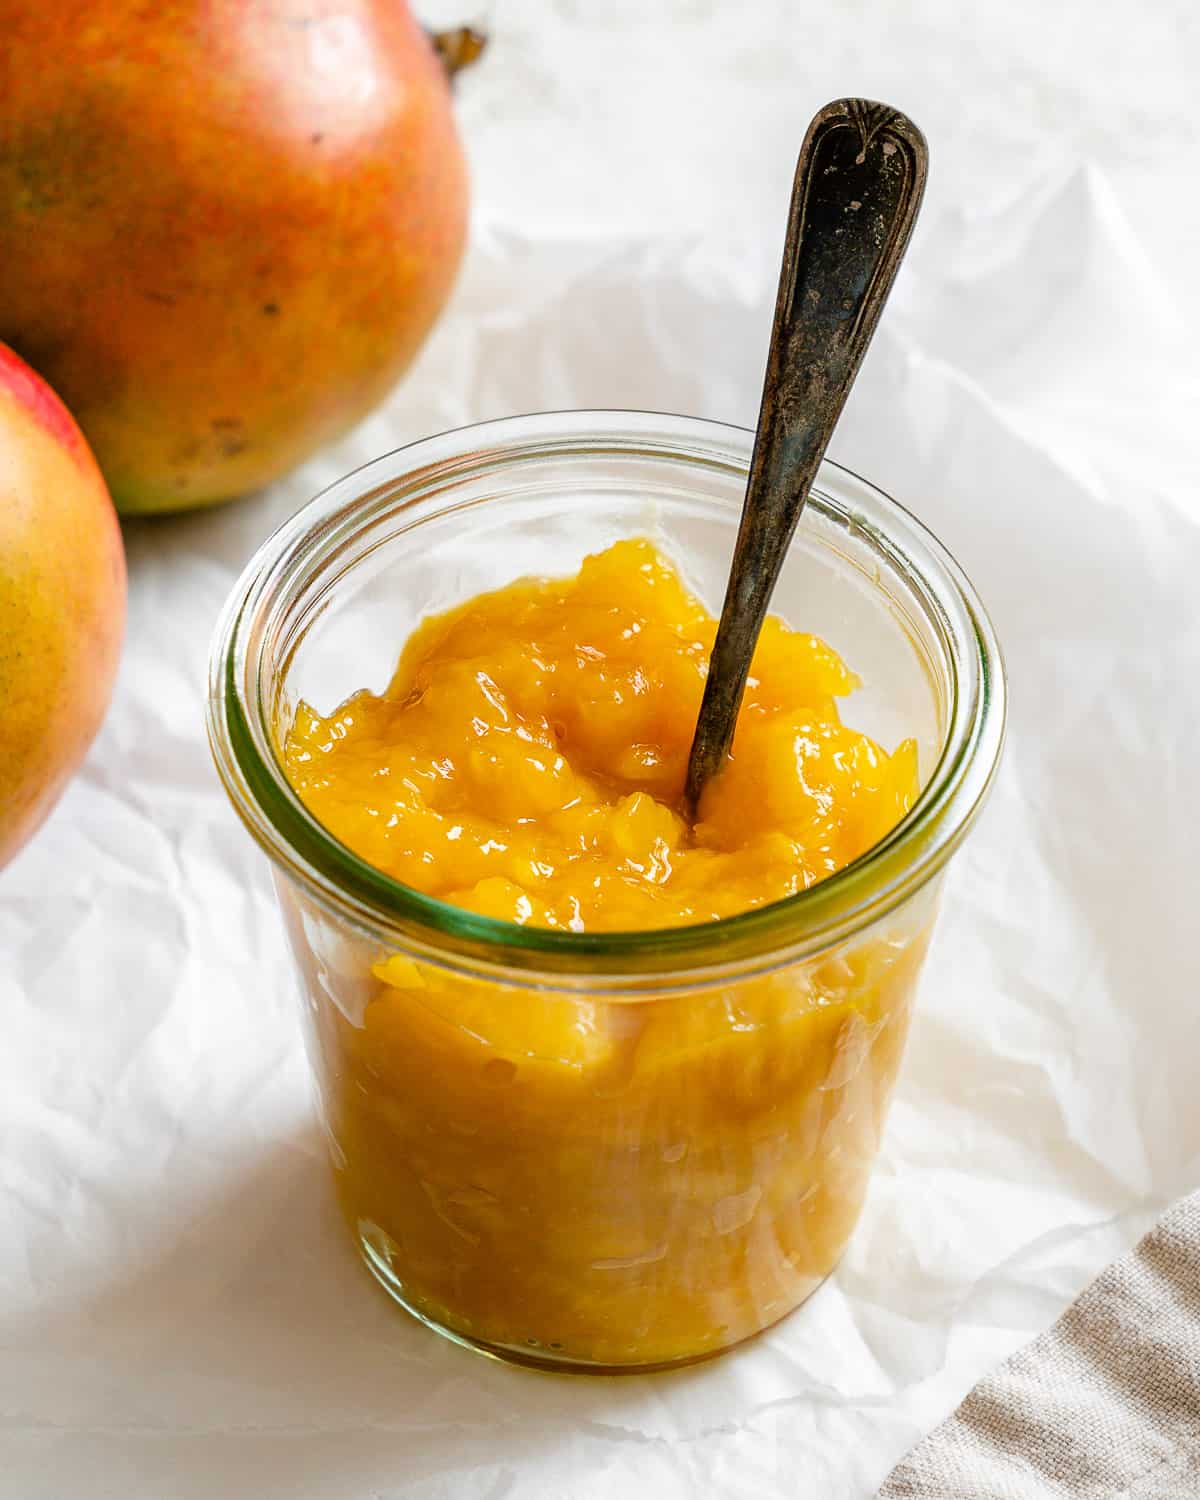 completed mango com،e in a jar a،nst a light background